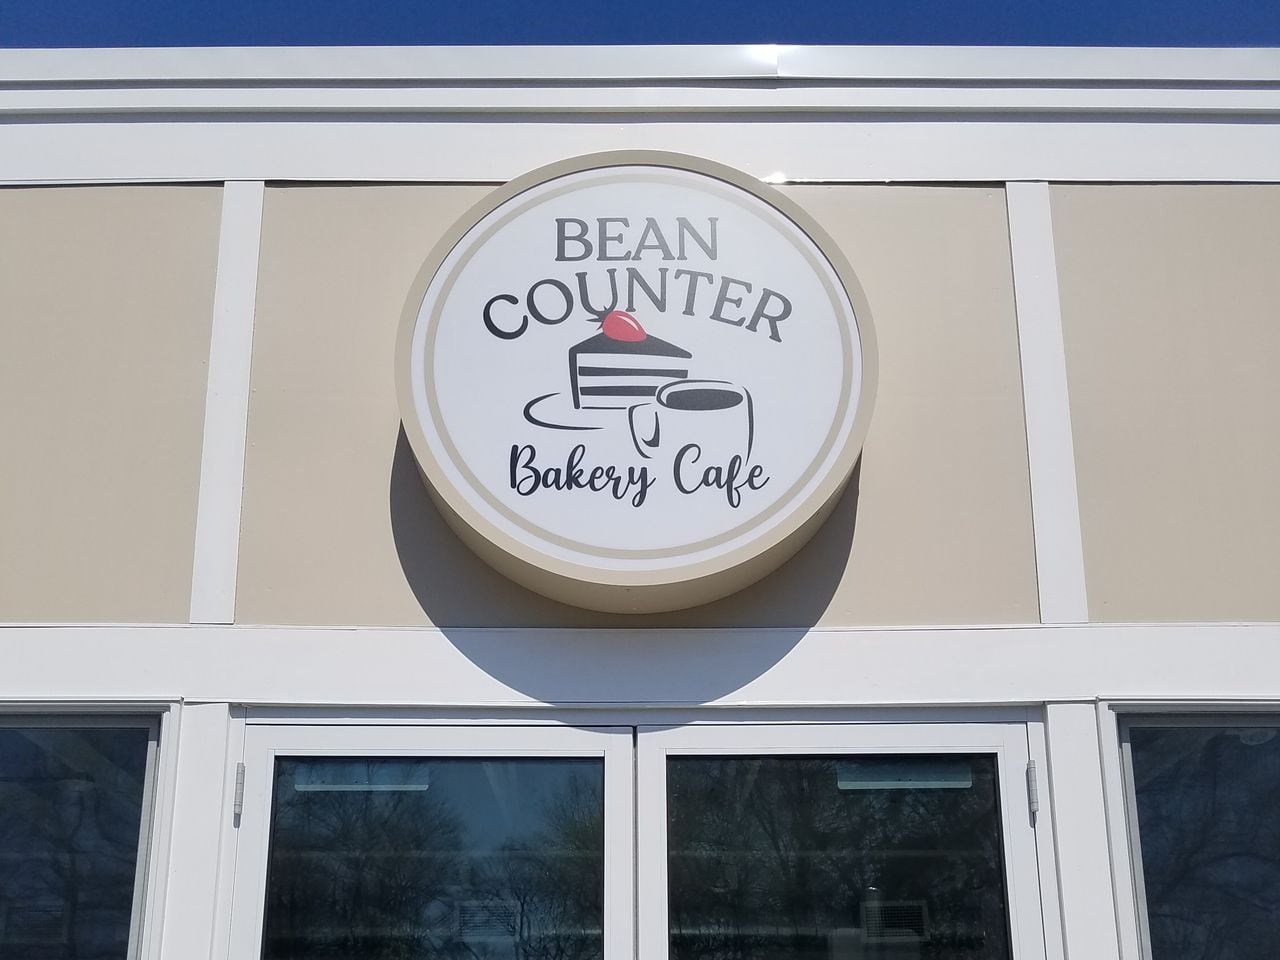 The Bean Counter in Worcester